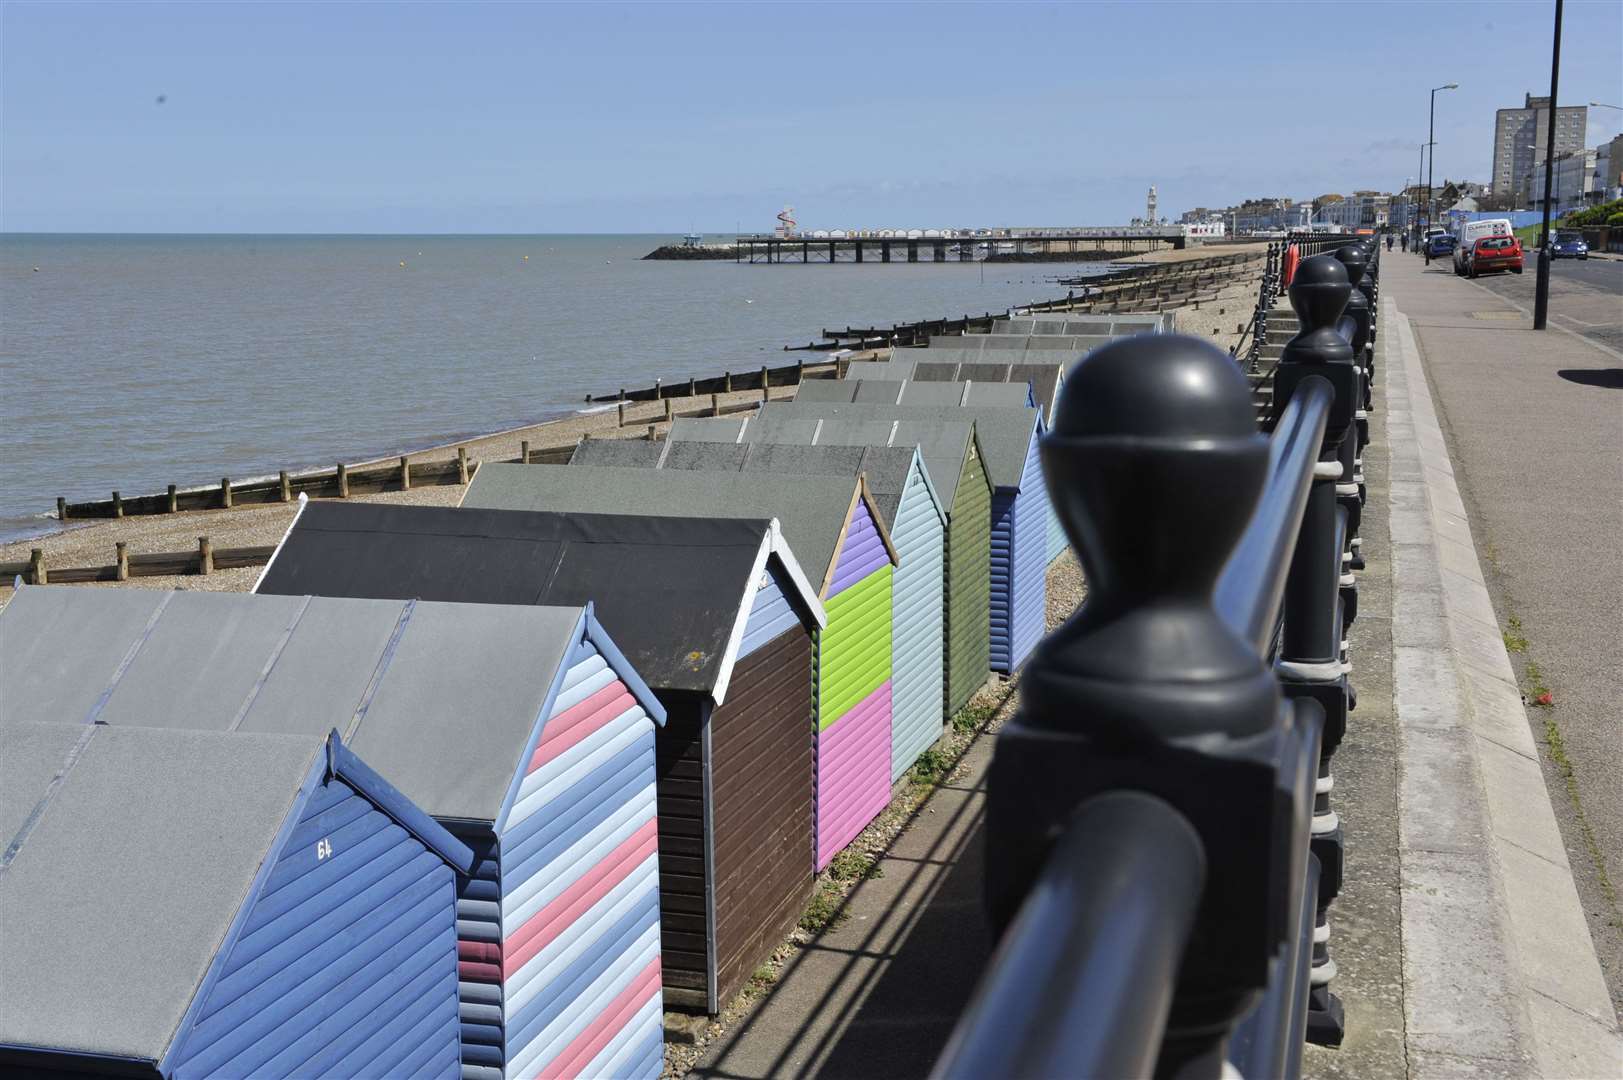 More than 80 huts could be erected along the Herne Bay coast